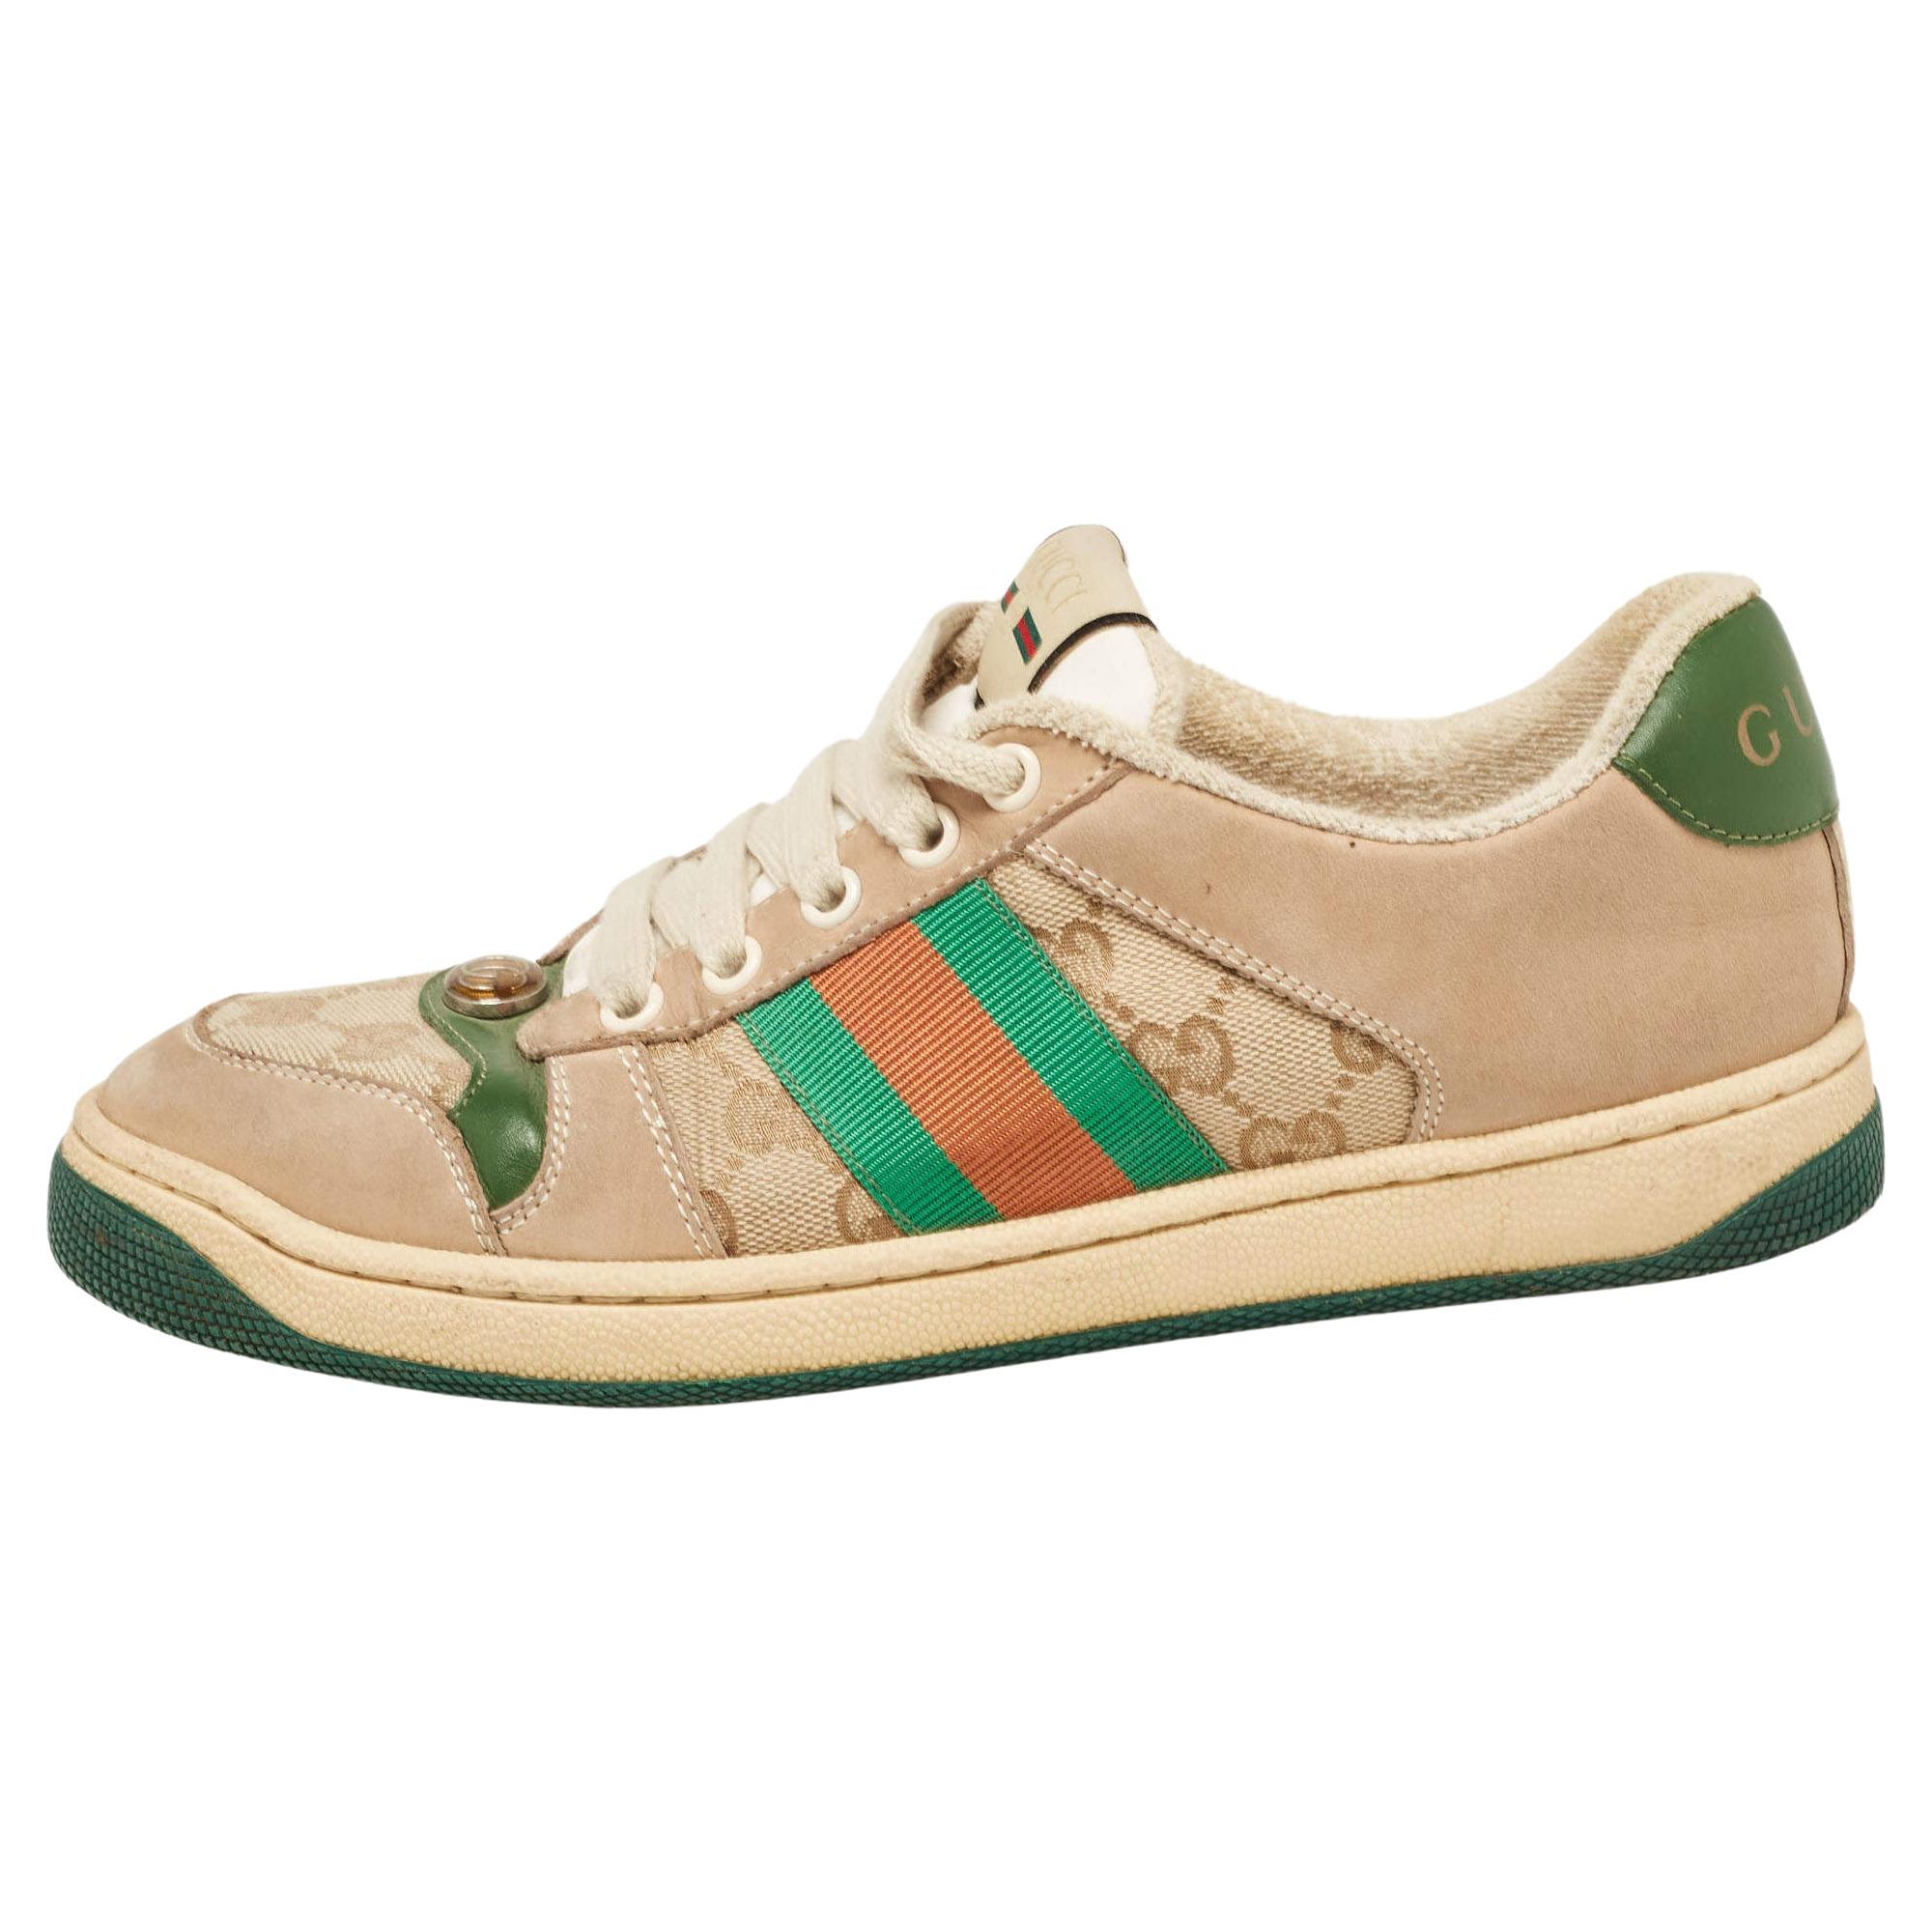 Gucci Multicolor Nubuck and Leather Screener Sneakers Size 37